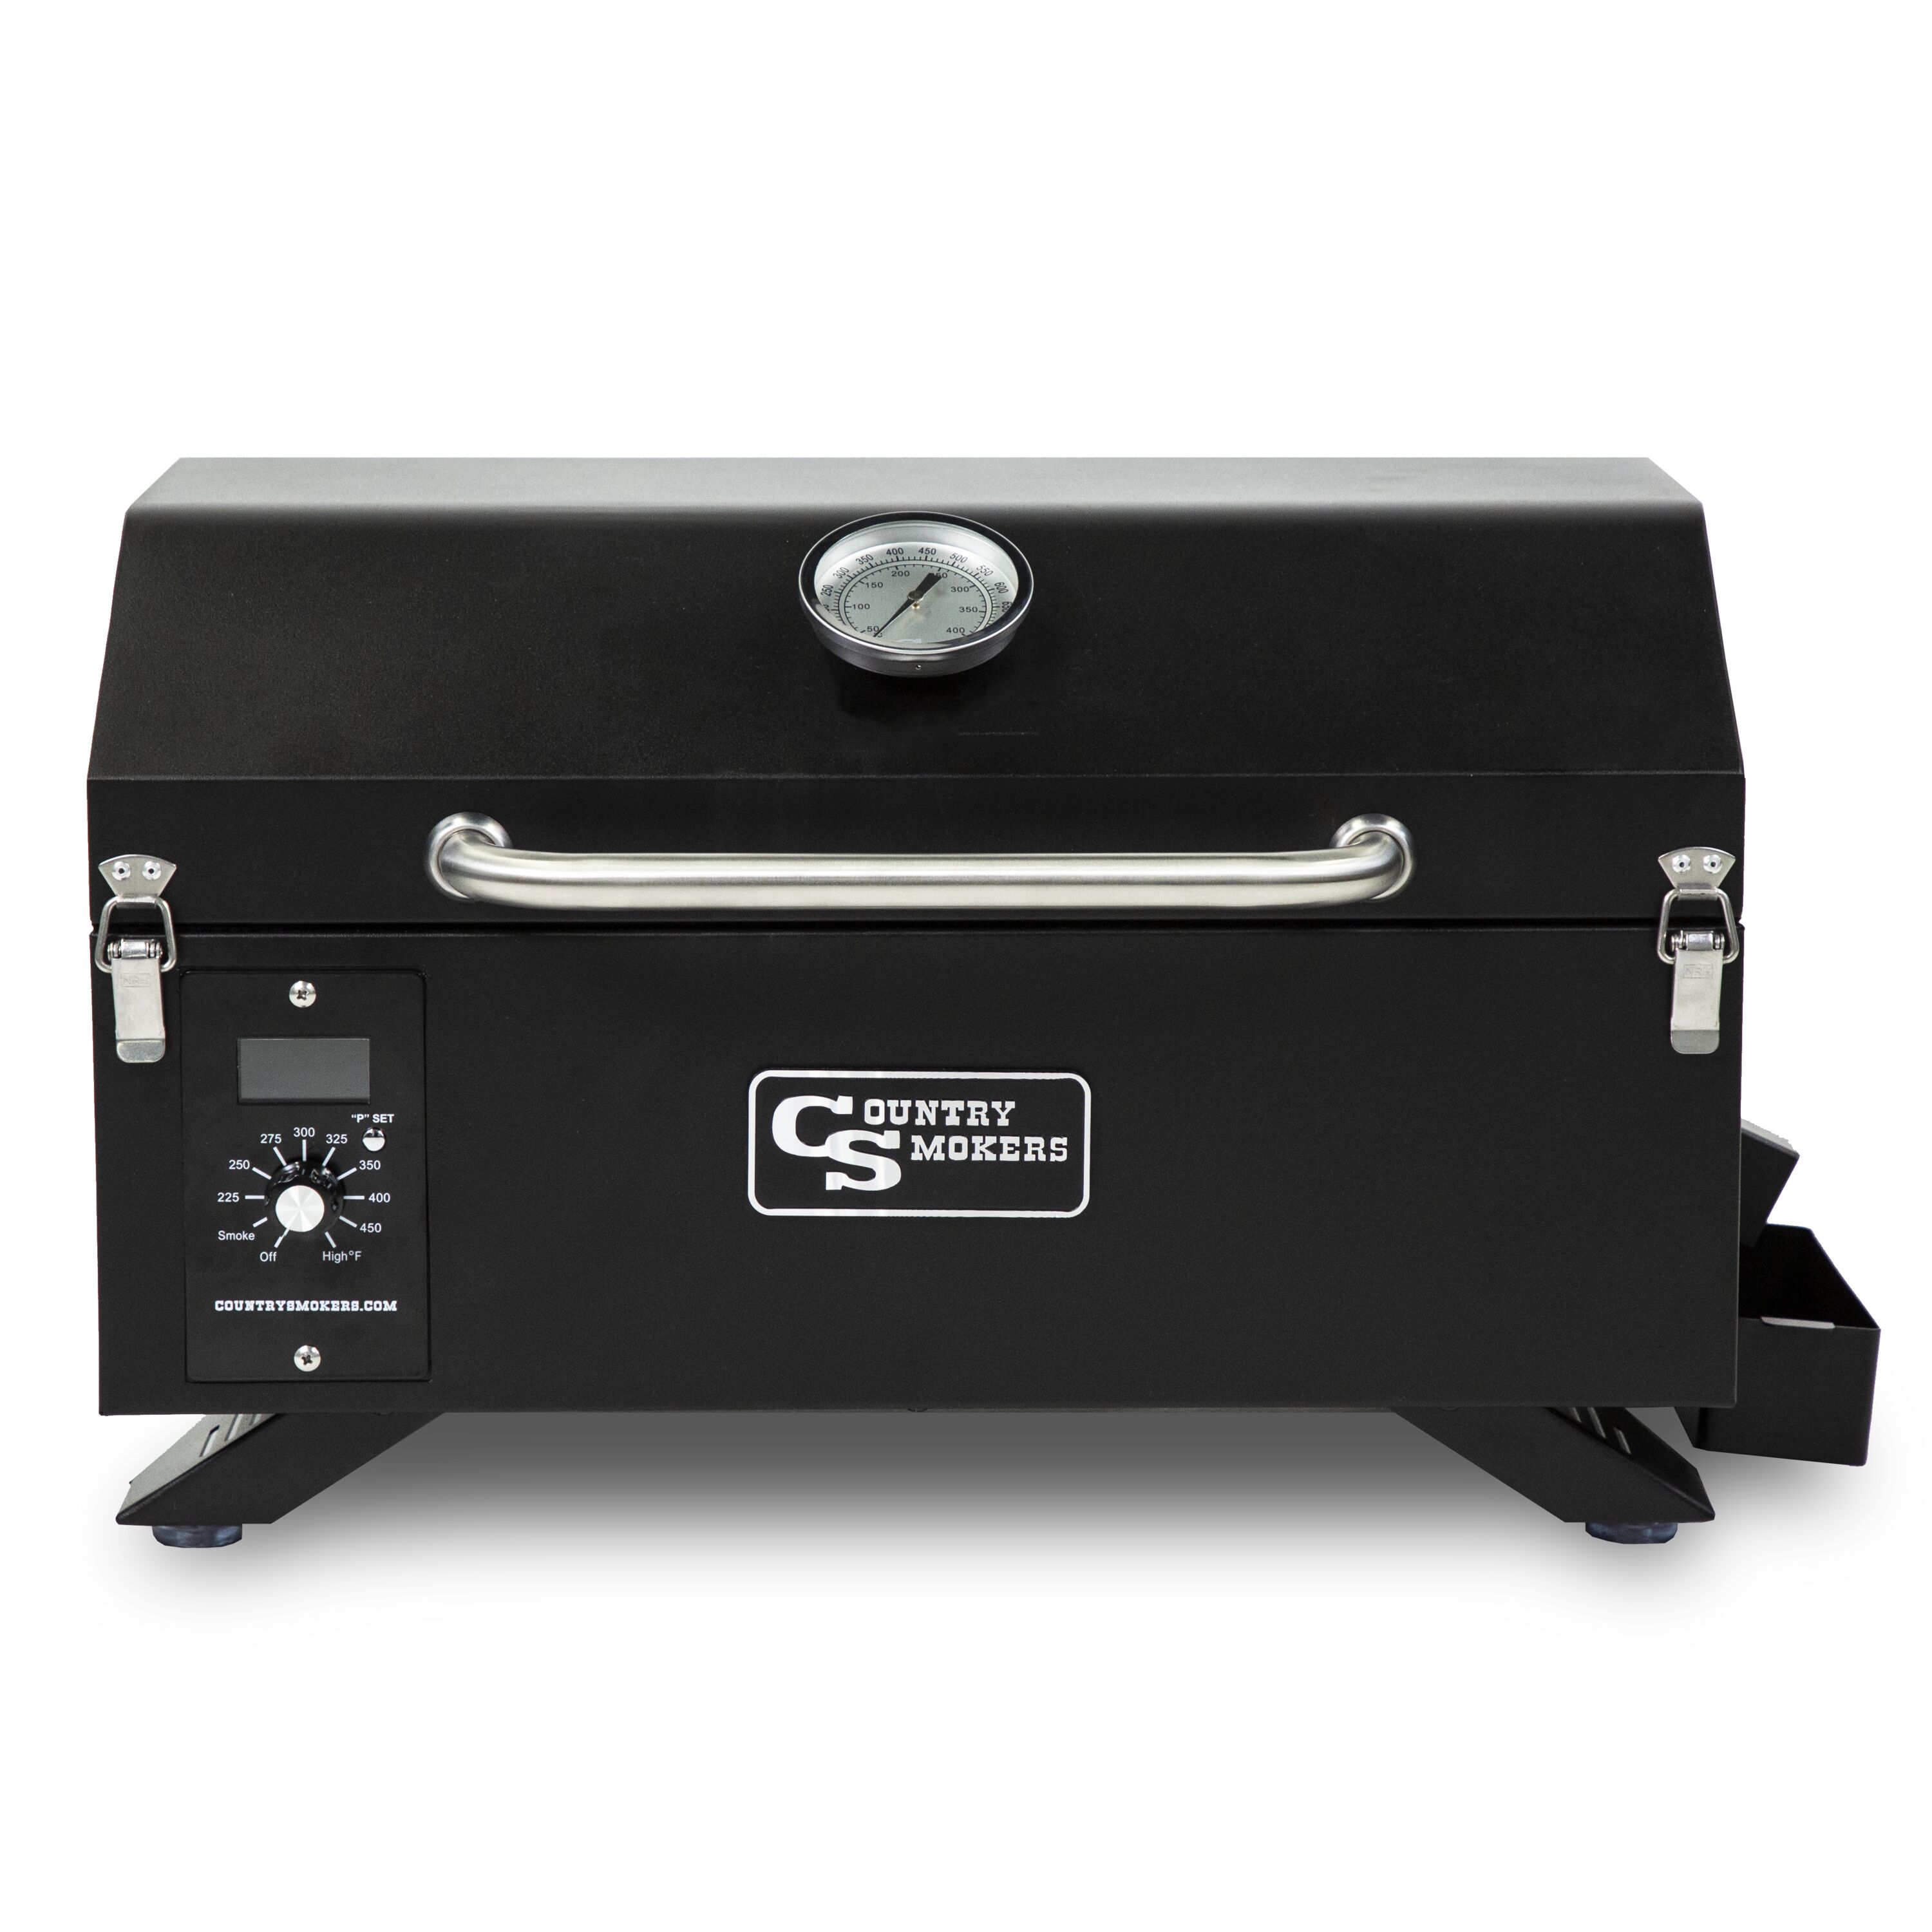 Smoker Grill & Pellet Grills and Smokers 